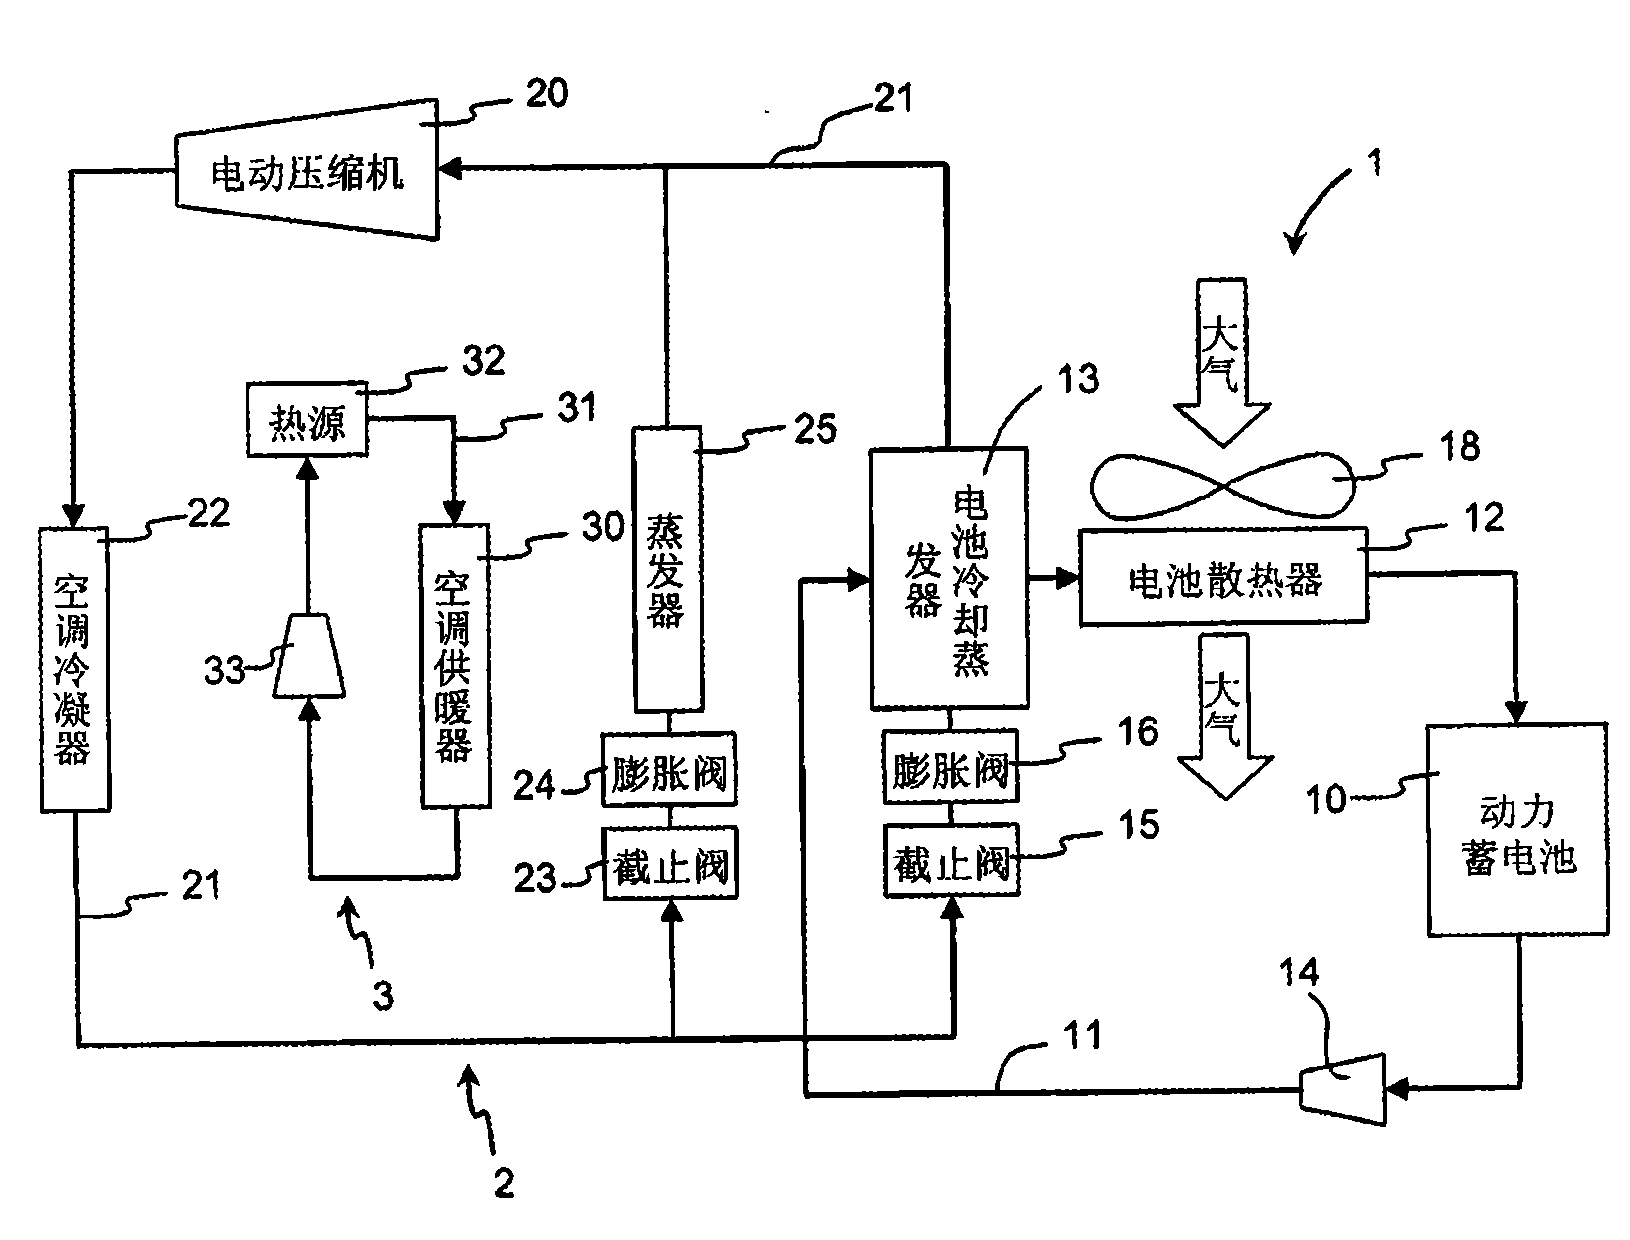 Power accumulator heat management system and vehicle